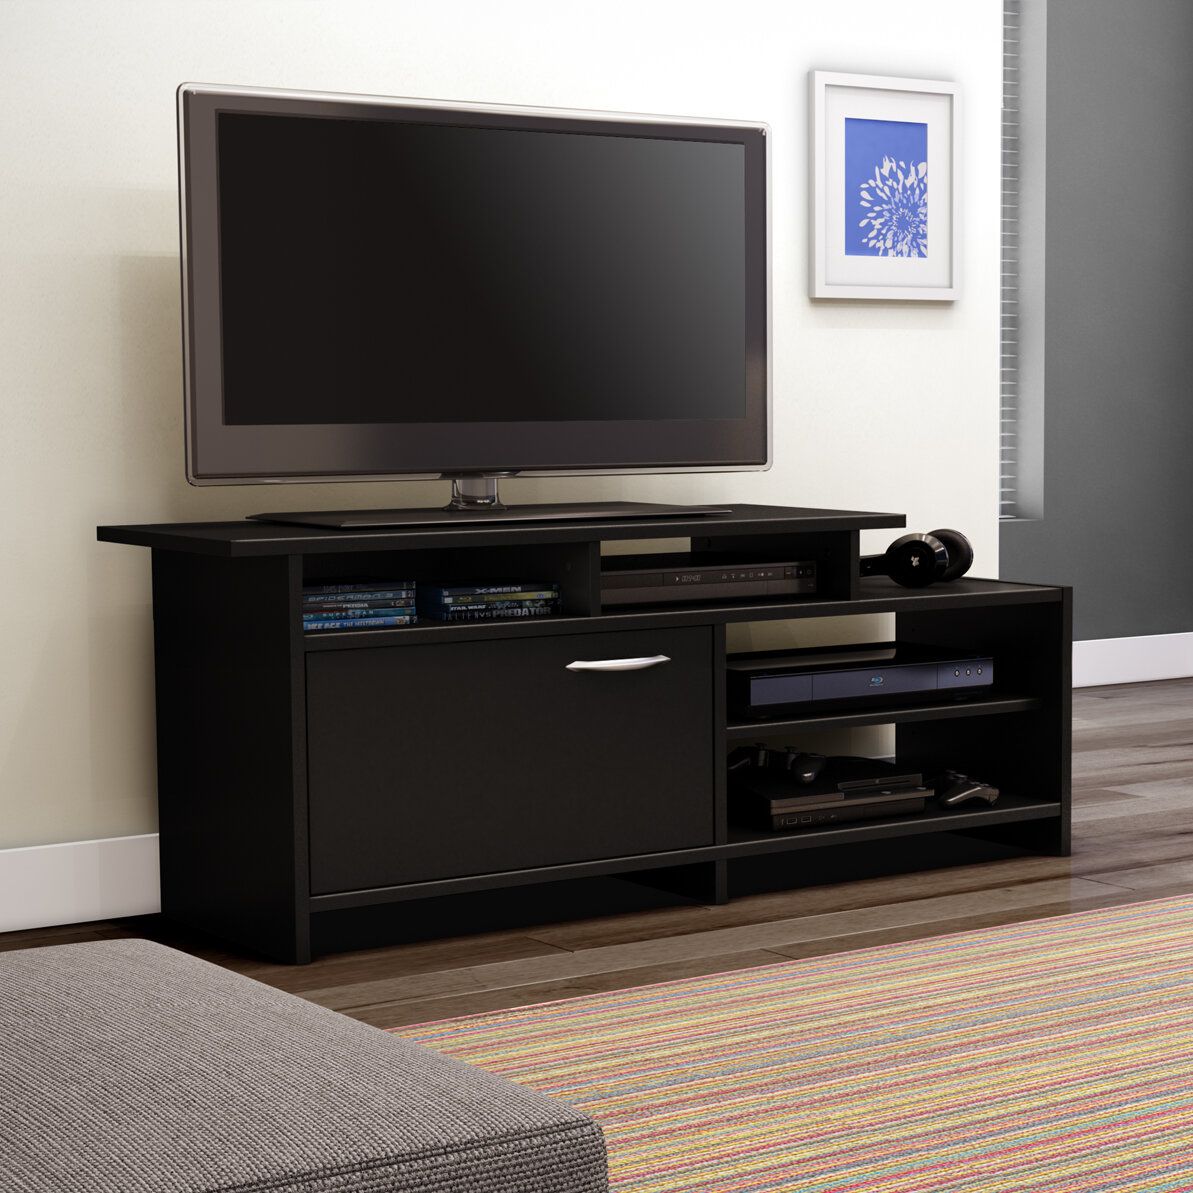 Black Tv Stand 60 Inch Flat Screen Entertainment Center Pertaining To Modern Tv Stands For Flat Screens (View 3 of 15)